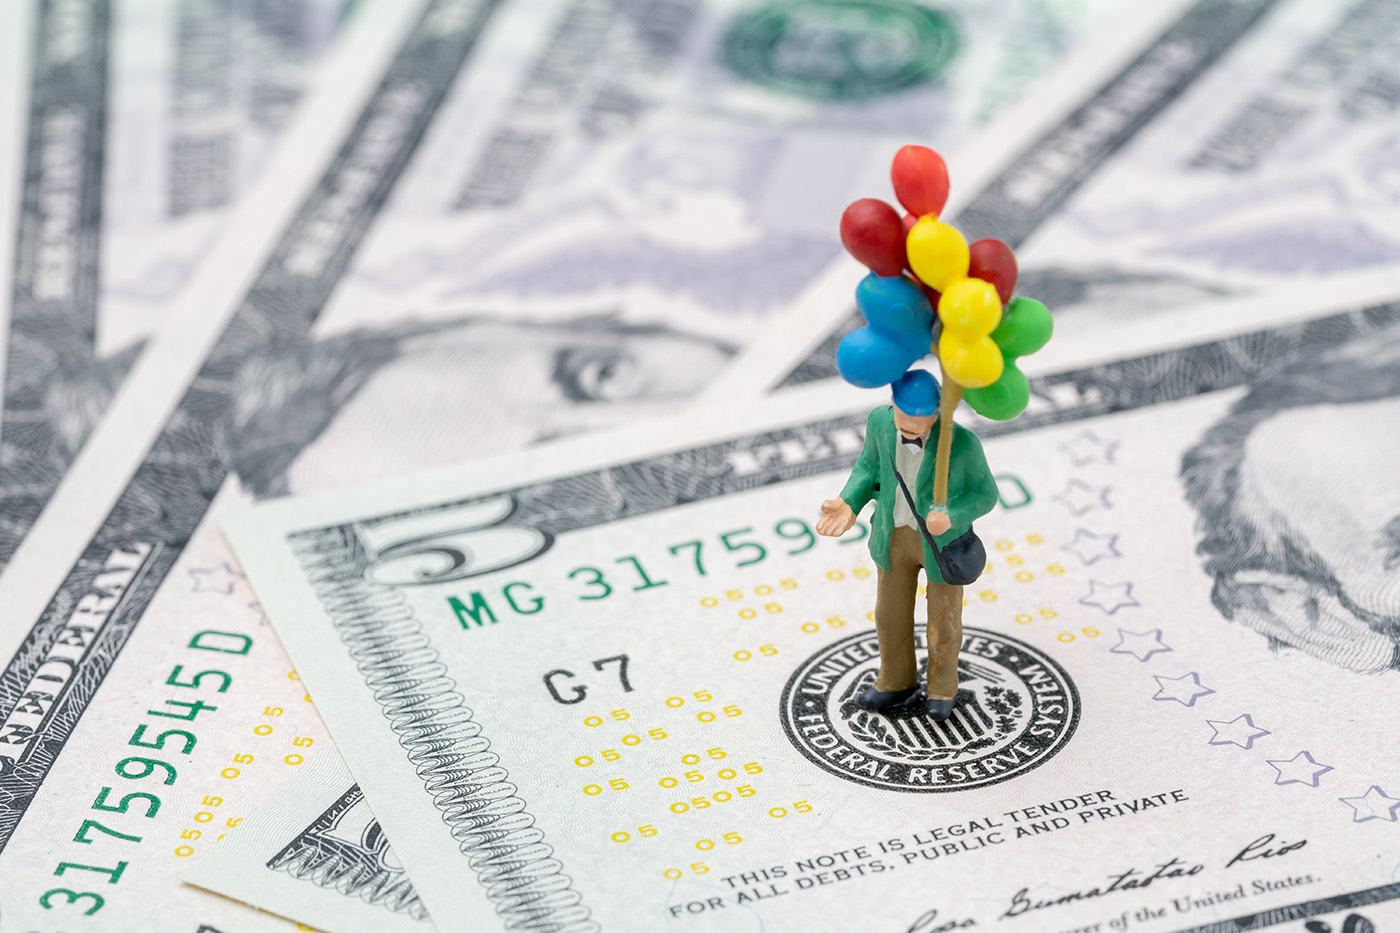 Plastic figure with a bunch of colourful balloons stood on a dollar bill